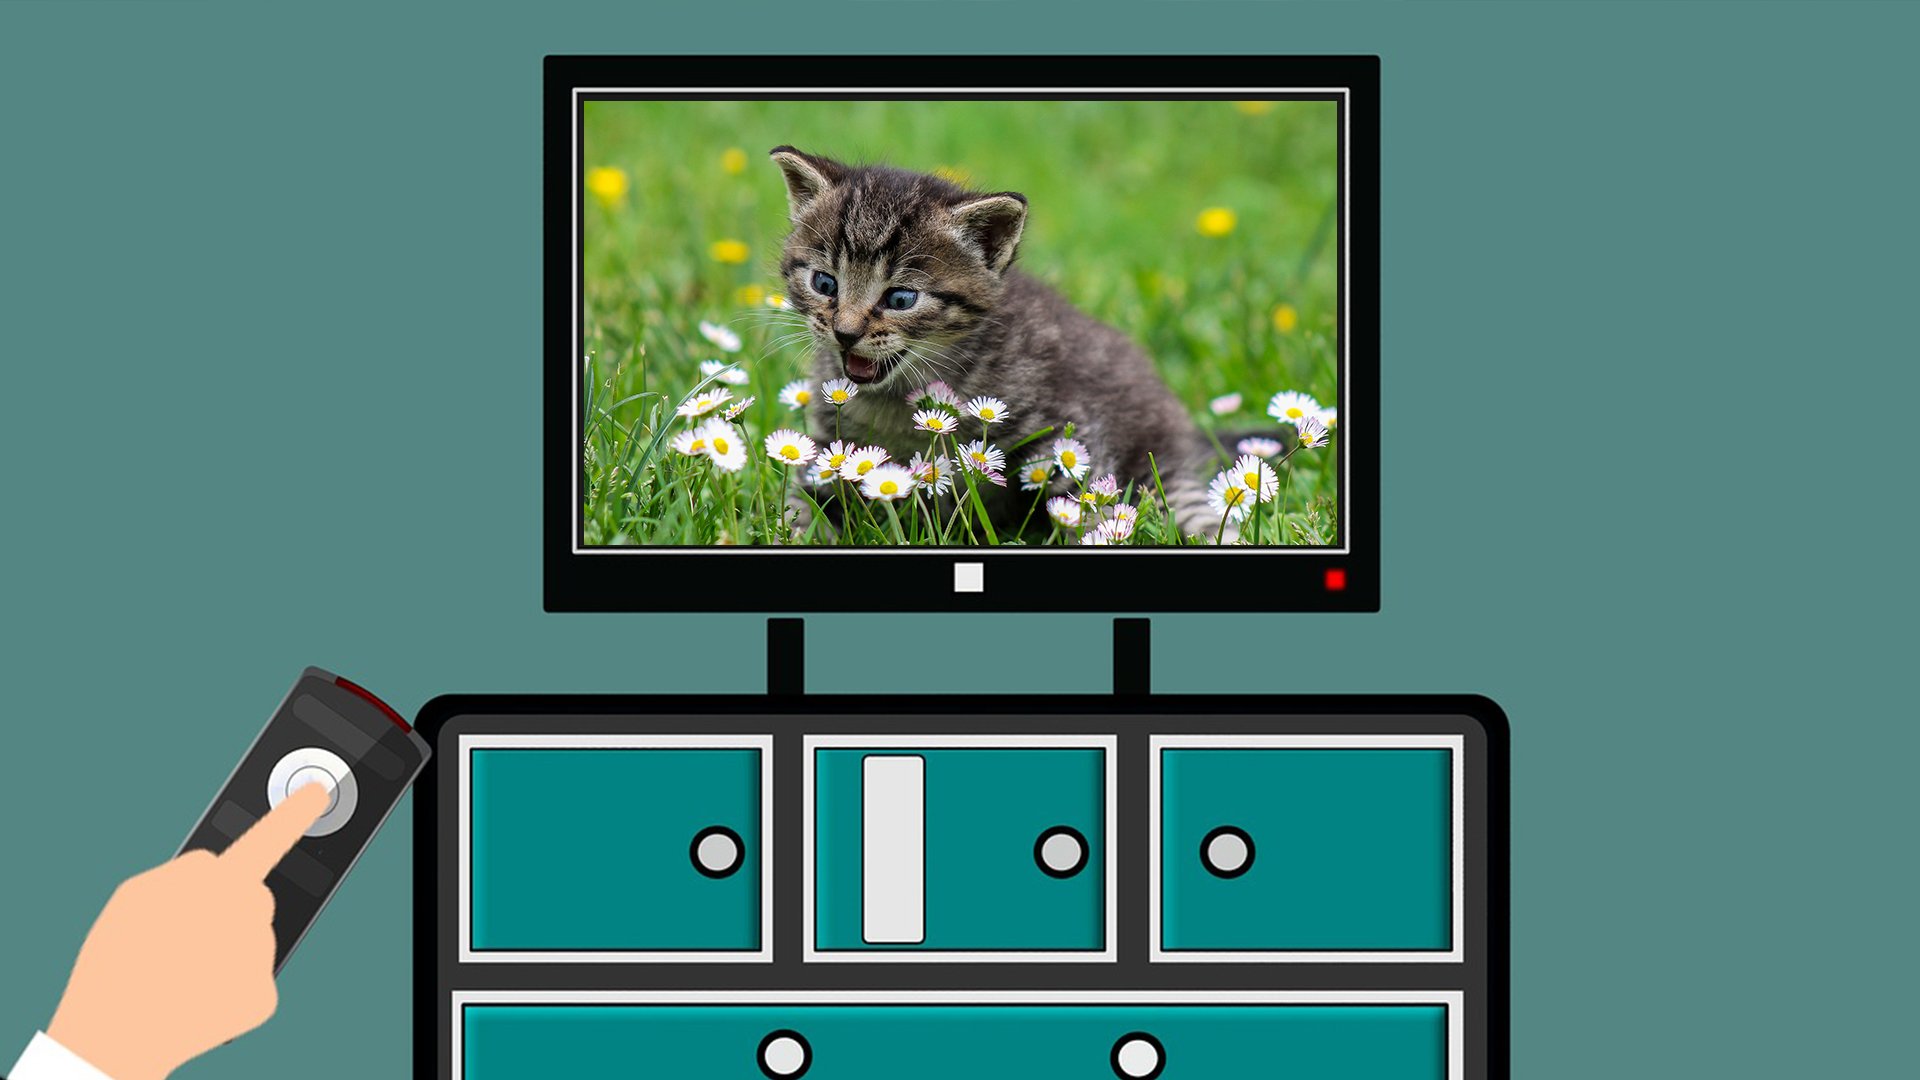 A cat on TV